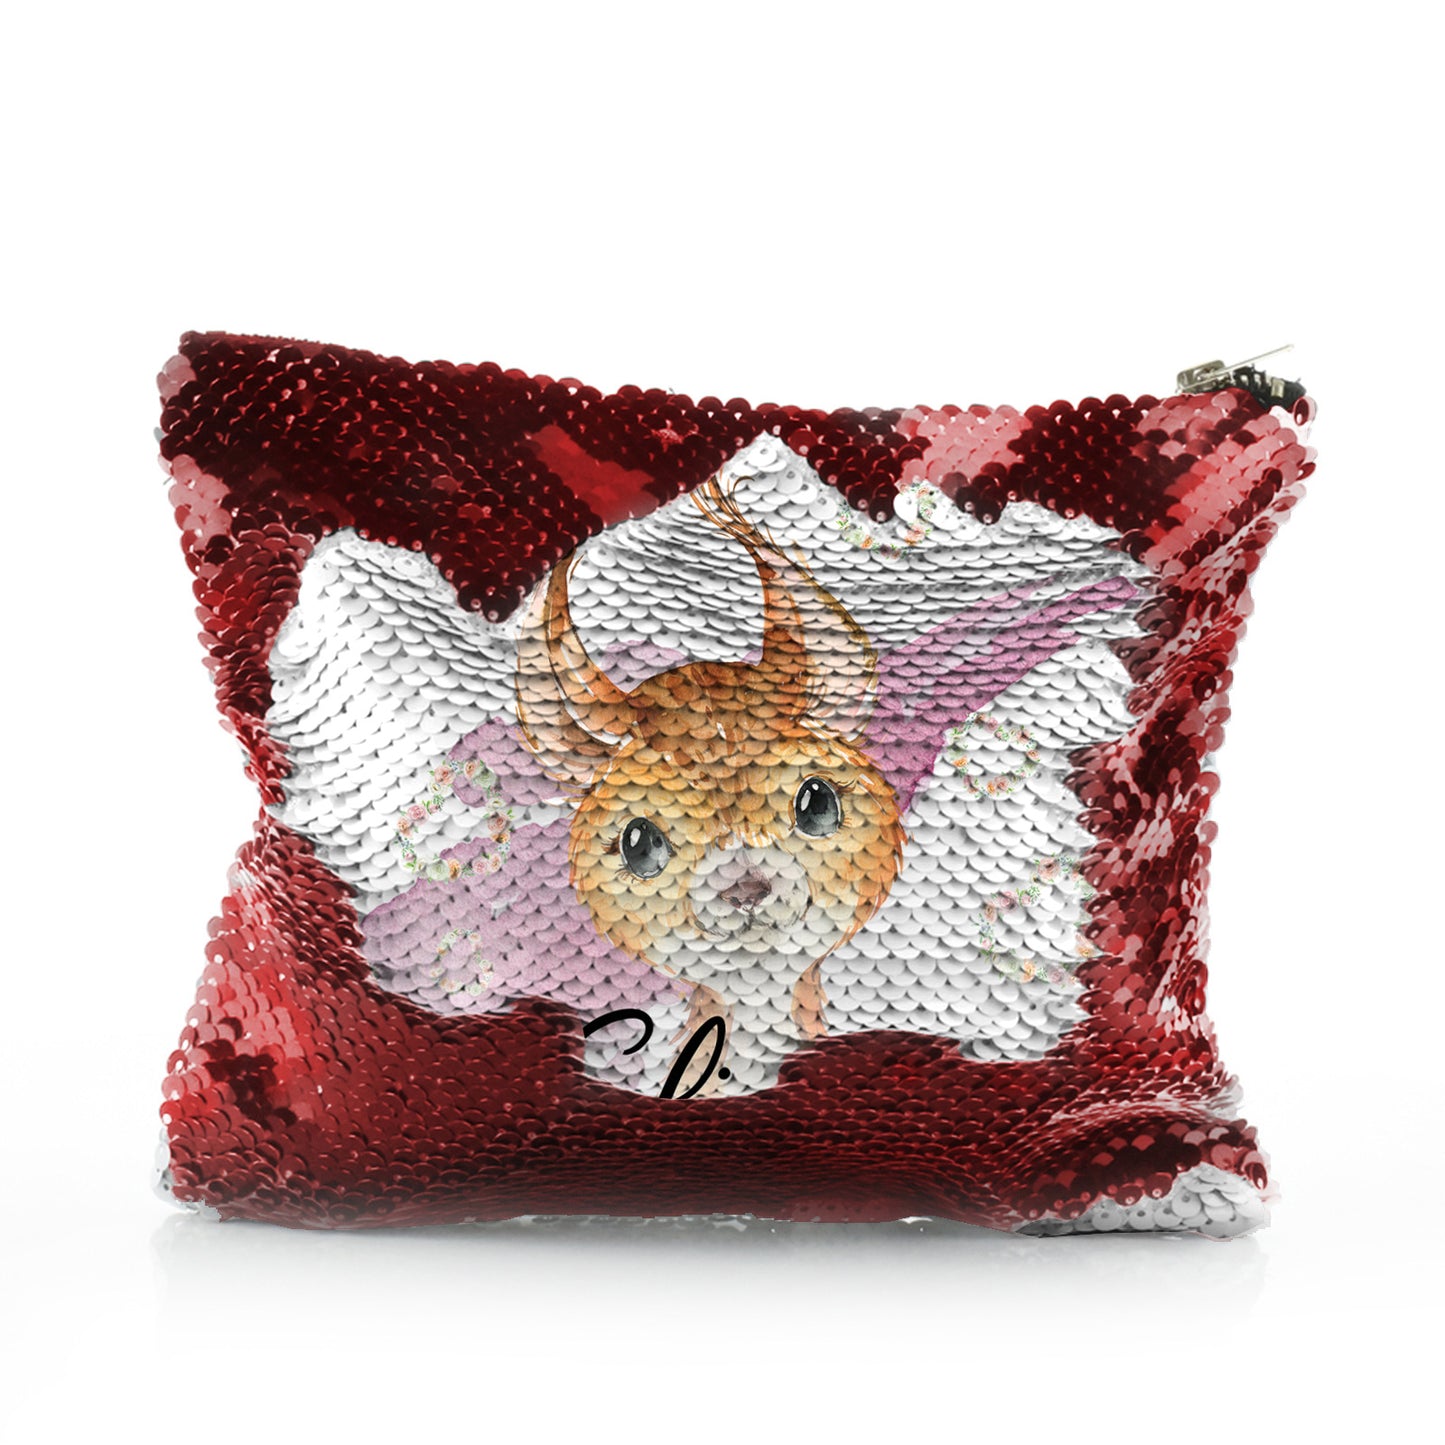 Personalised Sequin Zip Bag with Red squirrel Heart Wreaths and Cute Text